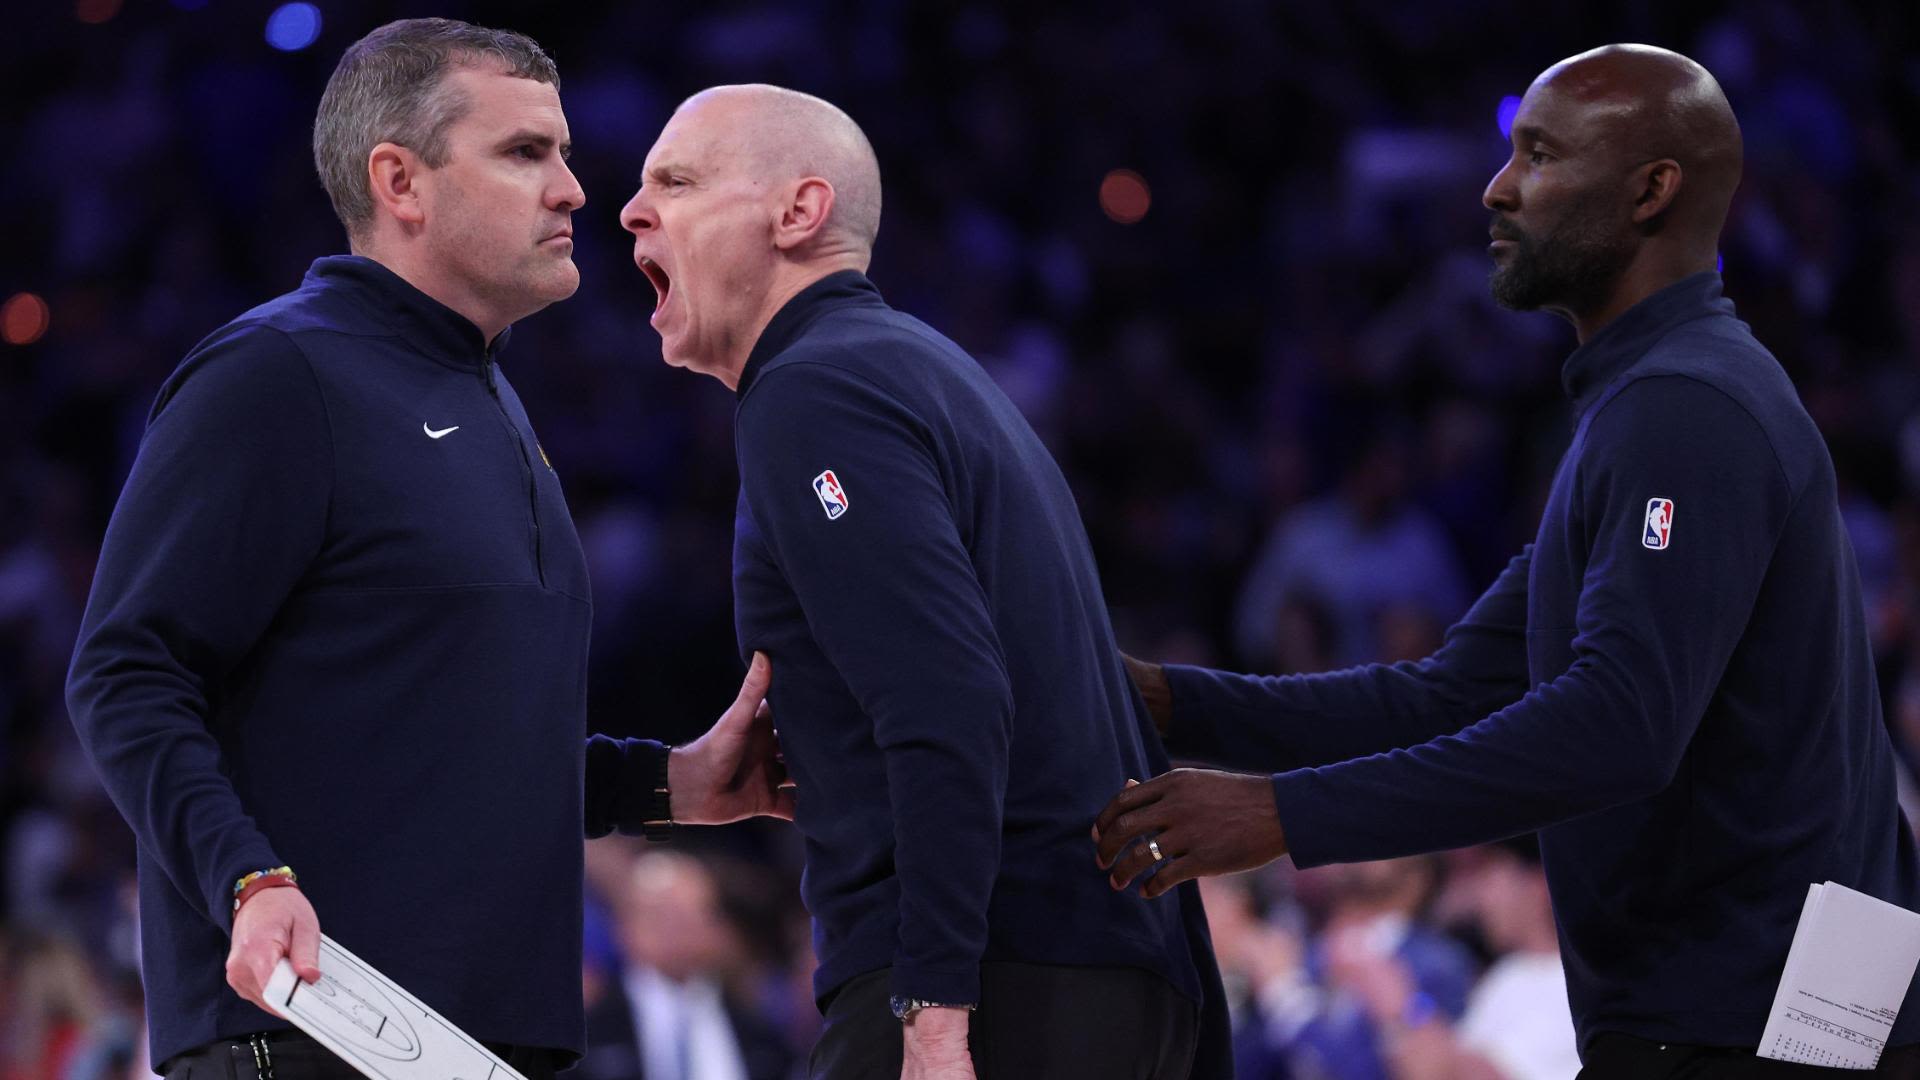 Rick Carlisle gets ejected for clapping in ref's face - Stream the Video - Watch ESPN